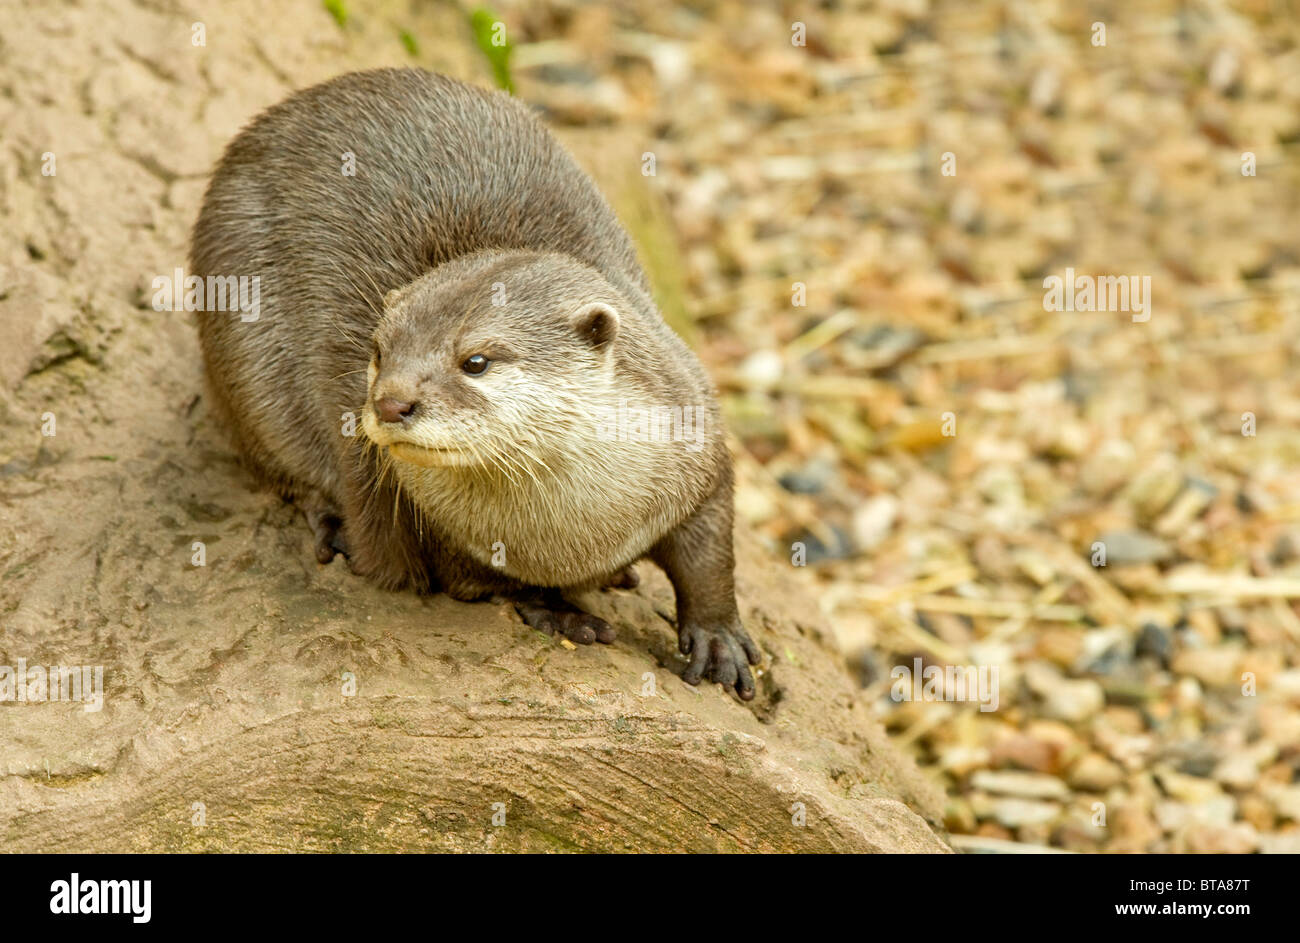 Otter sitting on a rock Stock Photo